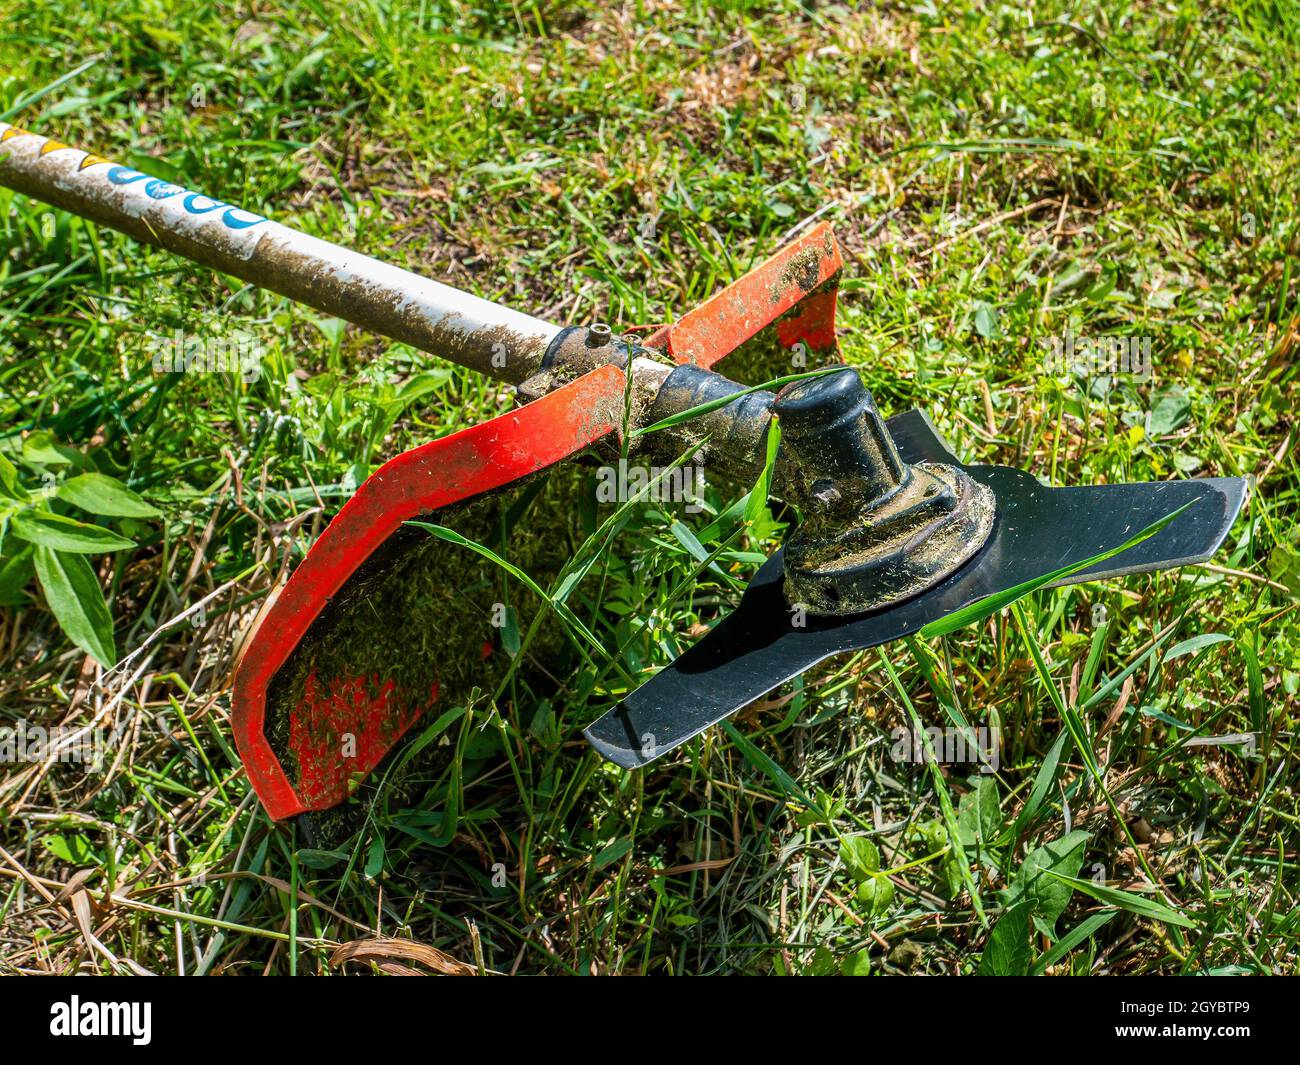 Lawn mower cutting disc for lawn mowing. Blade of knife. Trimmer cutting disc. Mow the grass with a lawn mower. Safety precautions. Garden equipment. Stock Photo